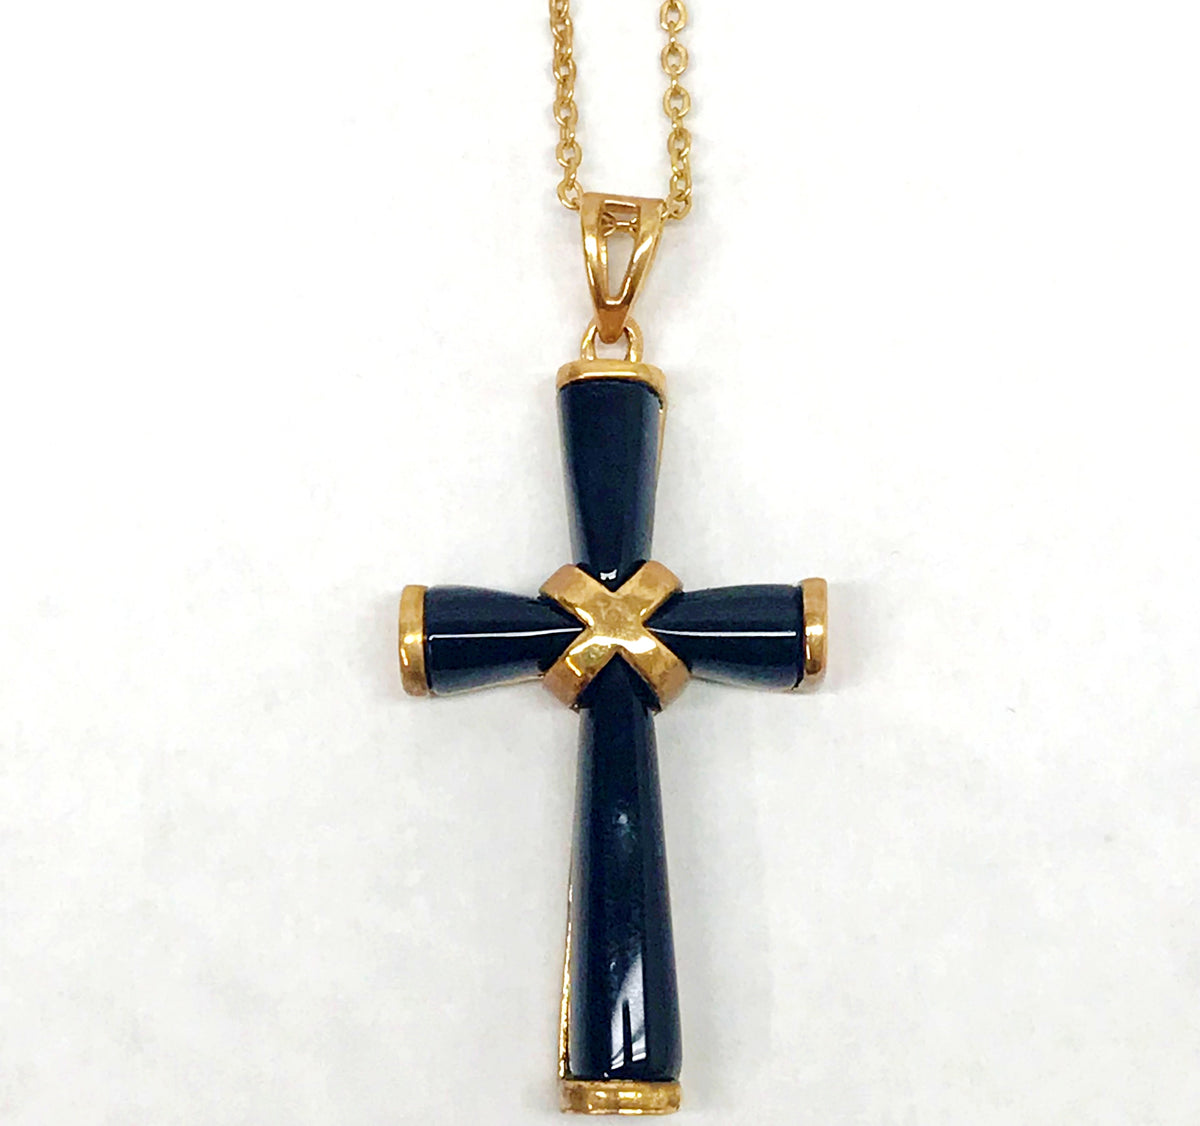 14K GF Cross Chain Link Necklace - Hers and His Treasures